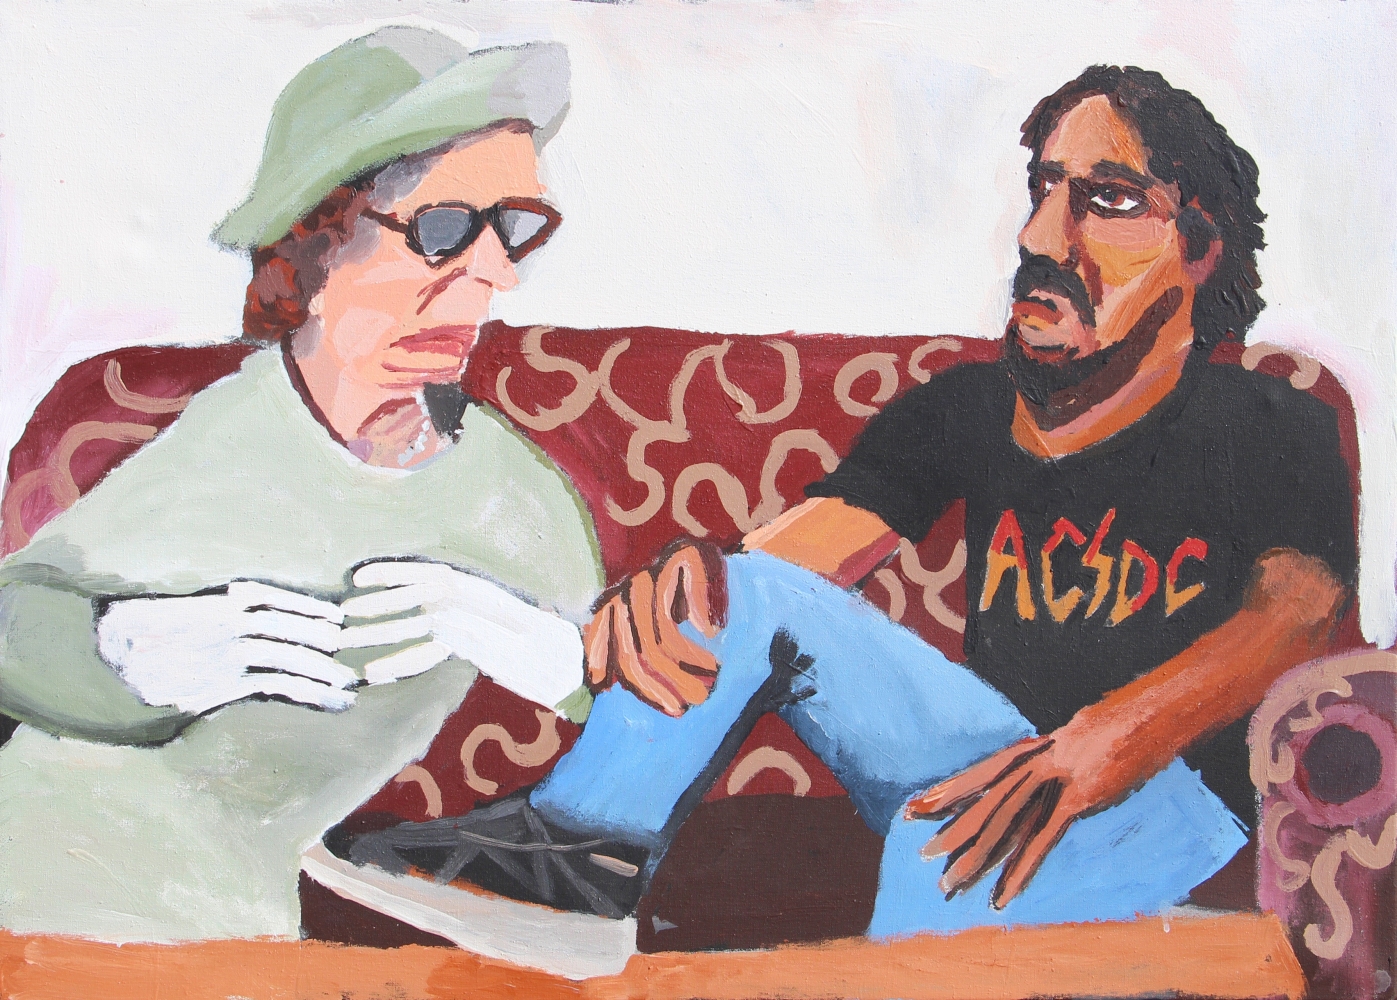 Vincent Namatjira

The Royal Tour (Vincent and Elizabeth 2), 2021

Acrylic on Linen
26.5 x 36 in.